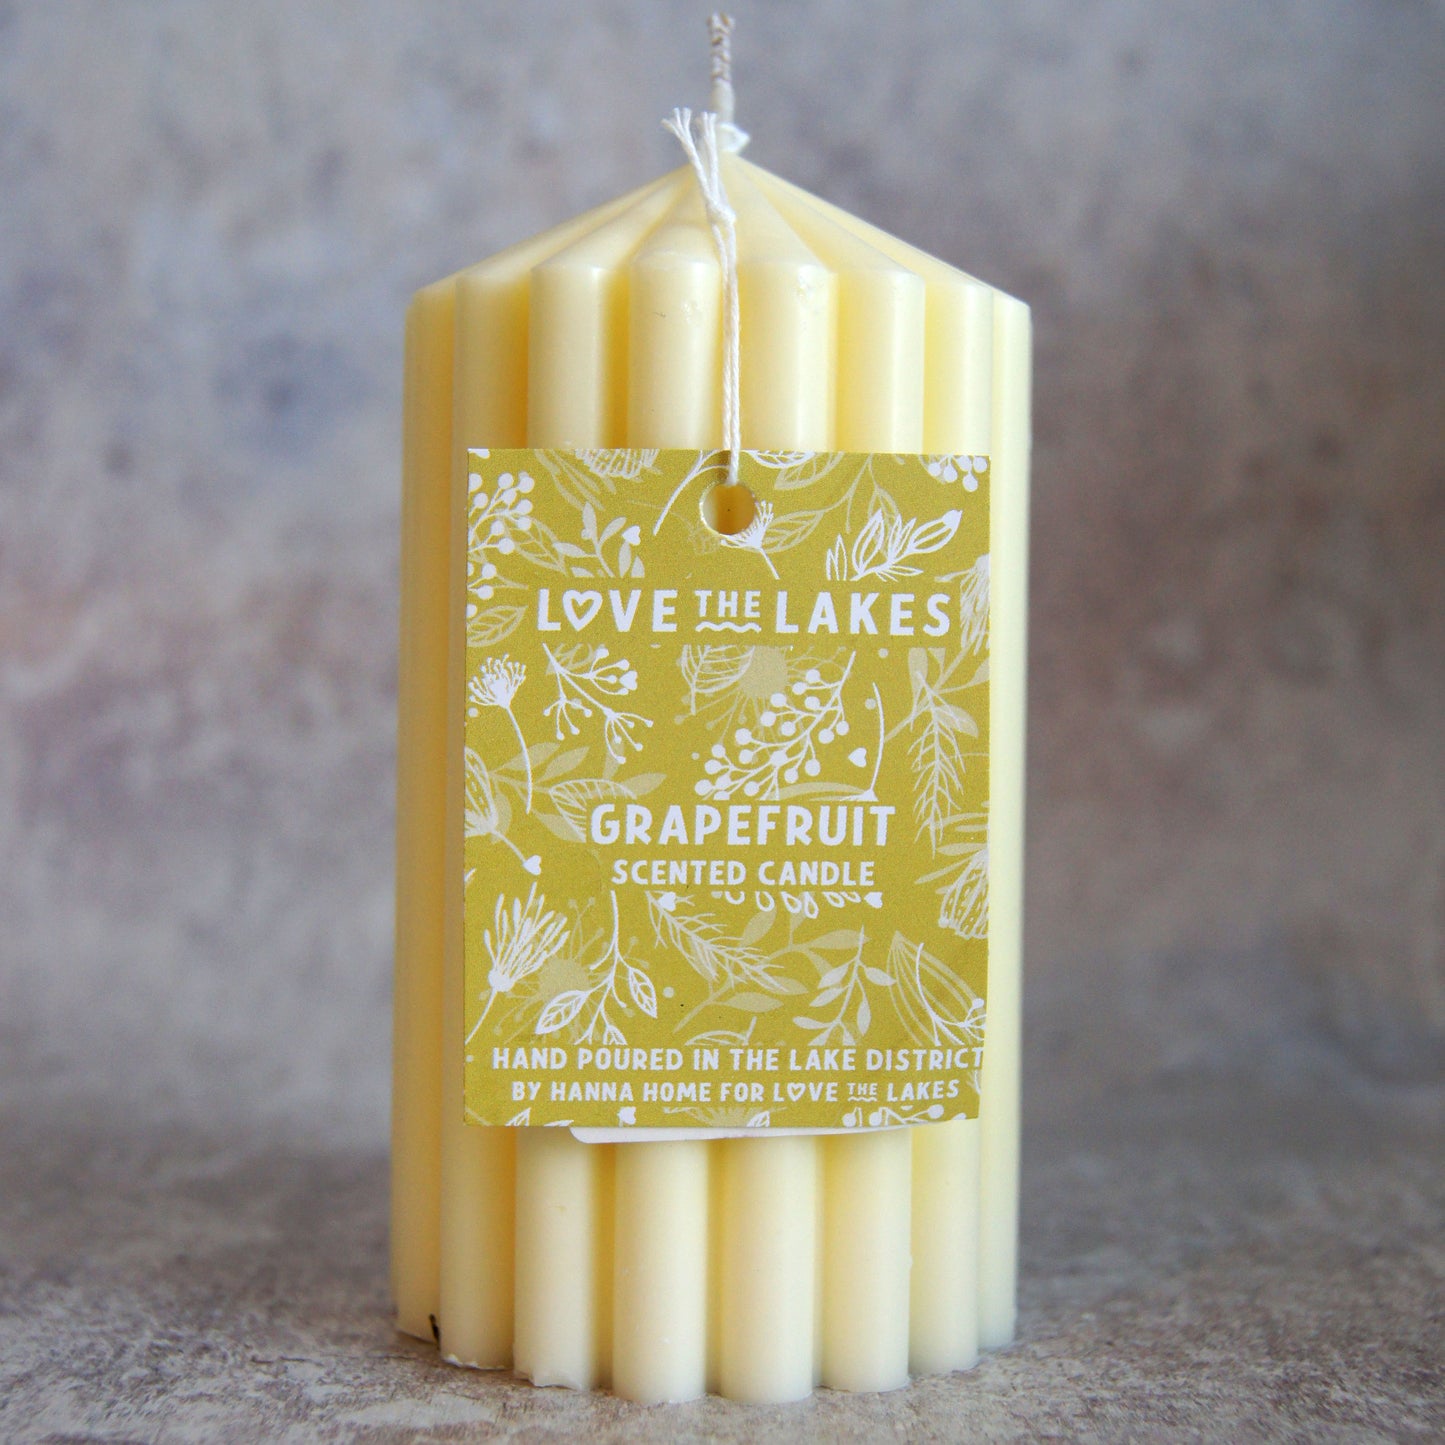 Grapefruit Scented Soy Wax Pillar Candle - 2 sizes